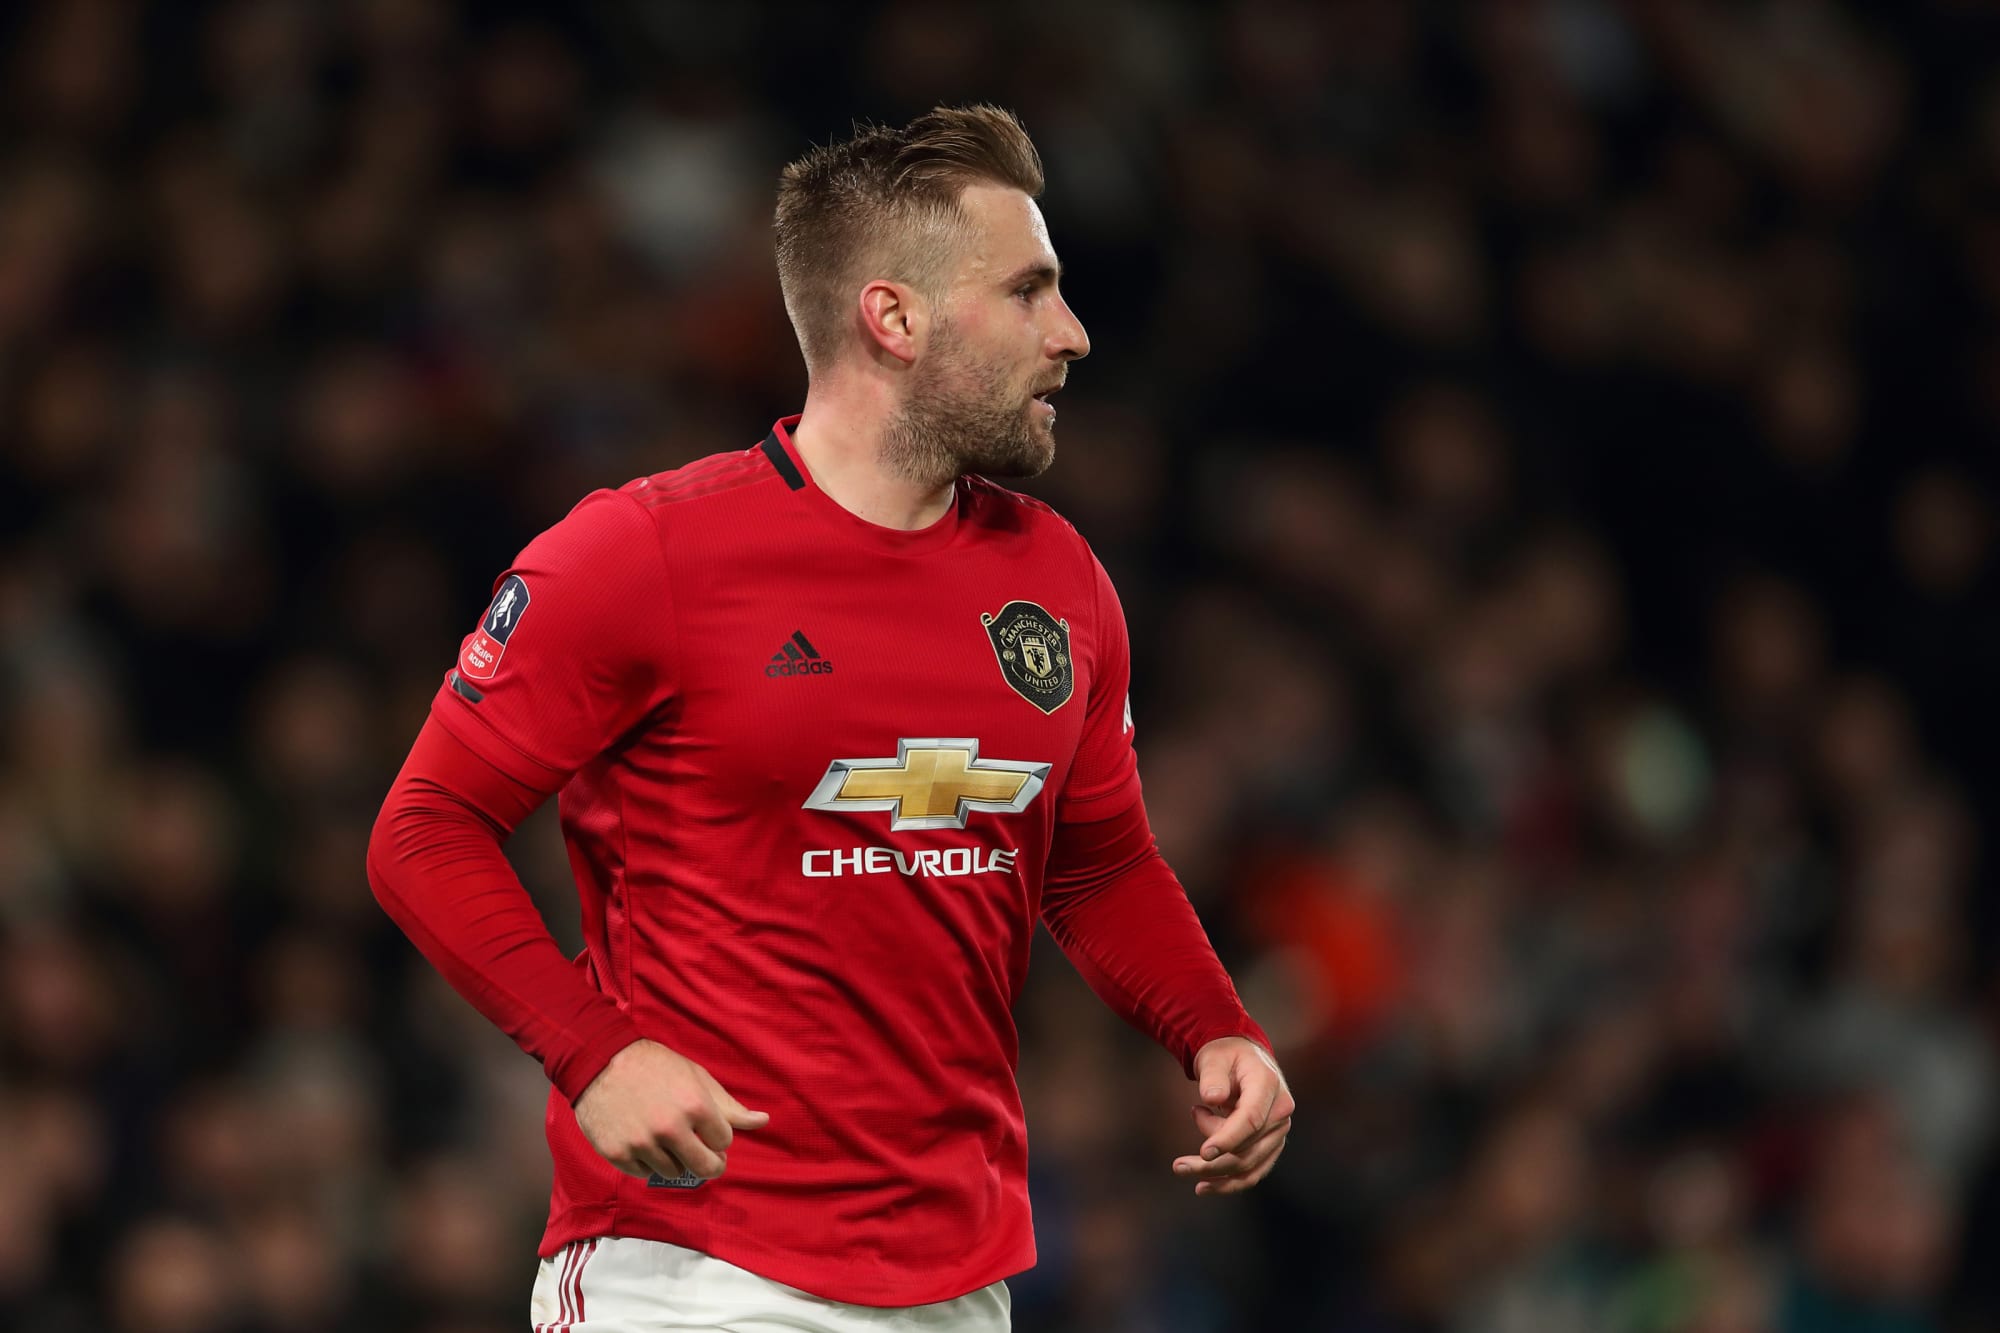 Manchester United: Luke Shaw will be the player to follow in 2020